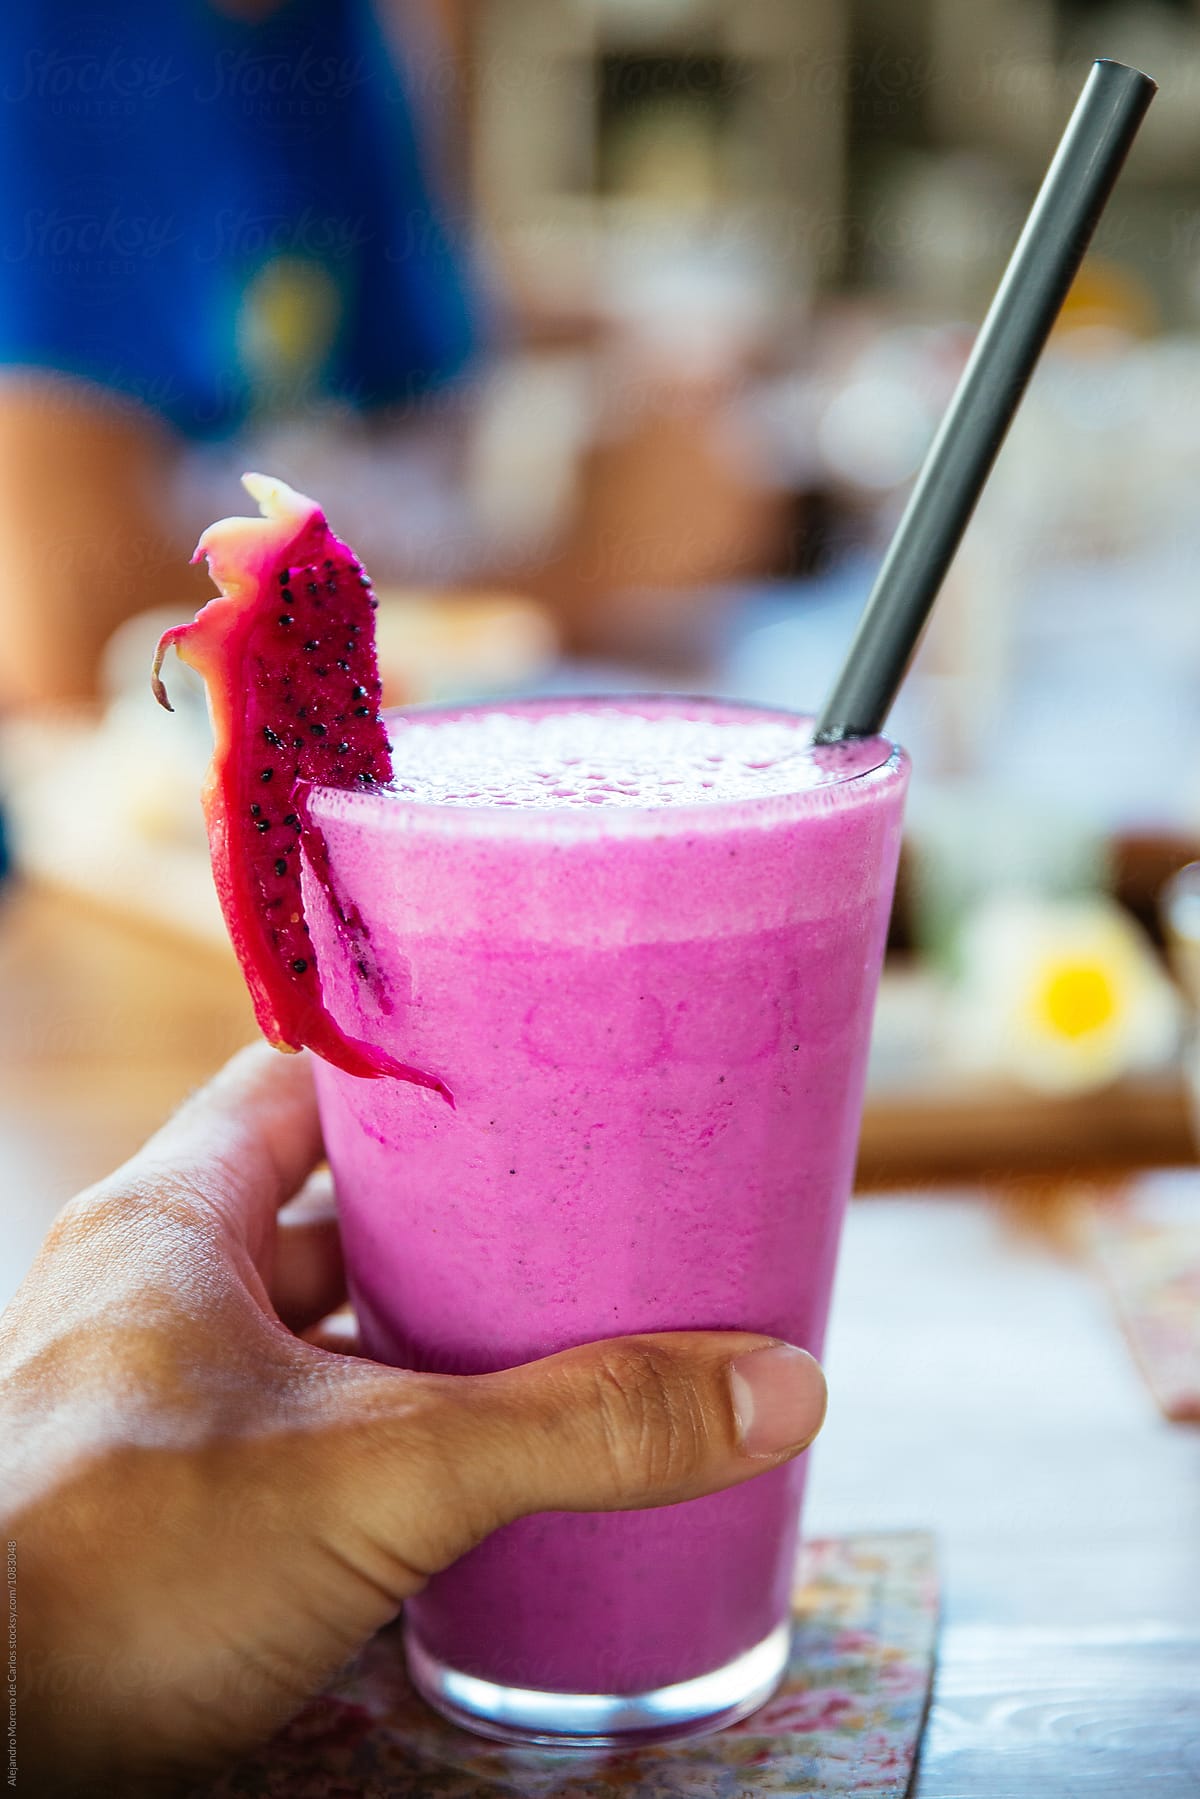 Tasty and fresh smoothie decorated with dragon fruit slice and straw.Bokeh